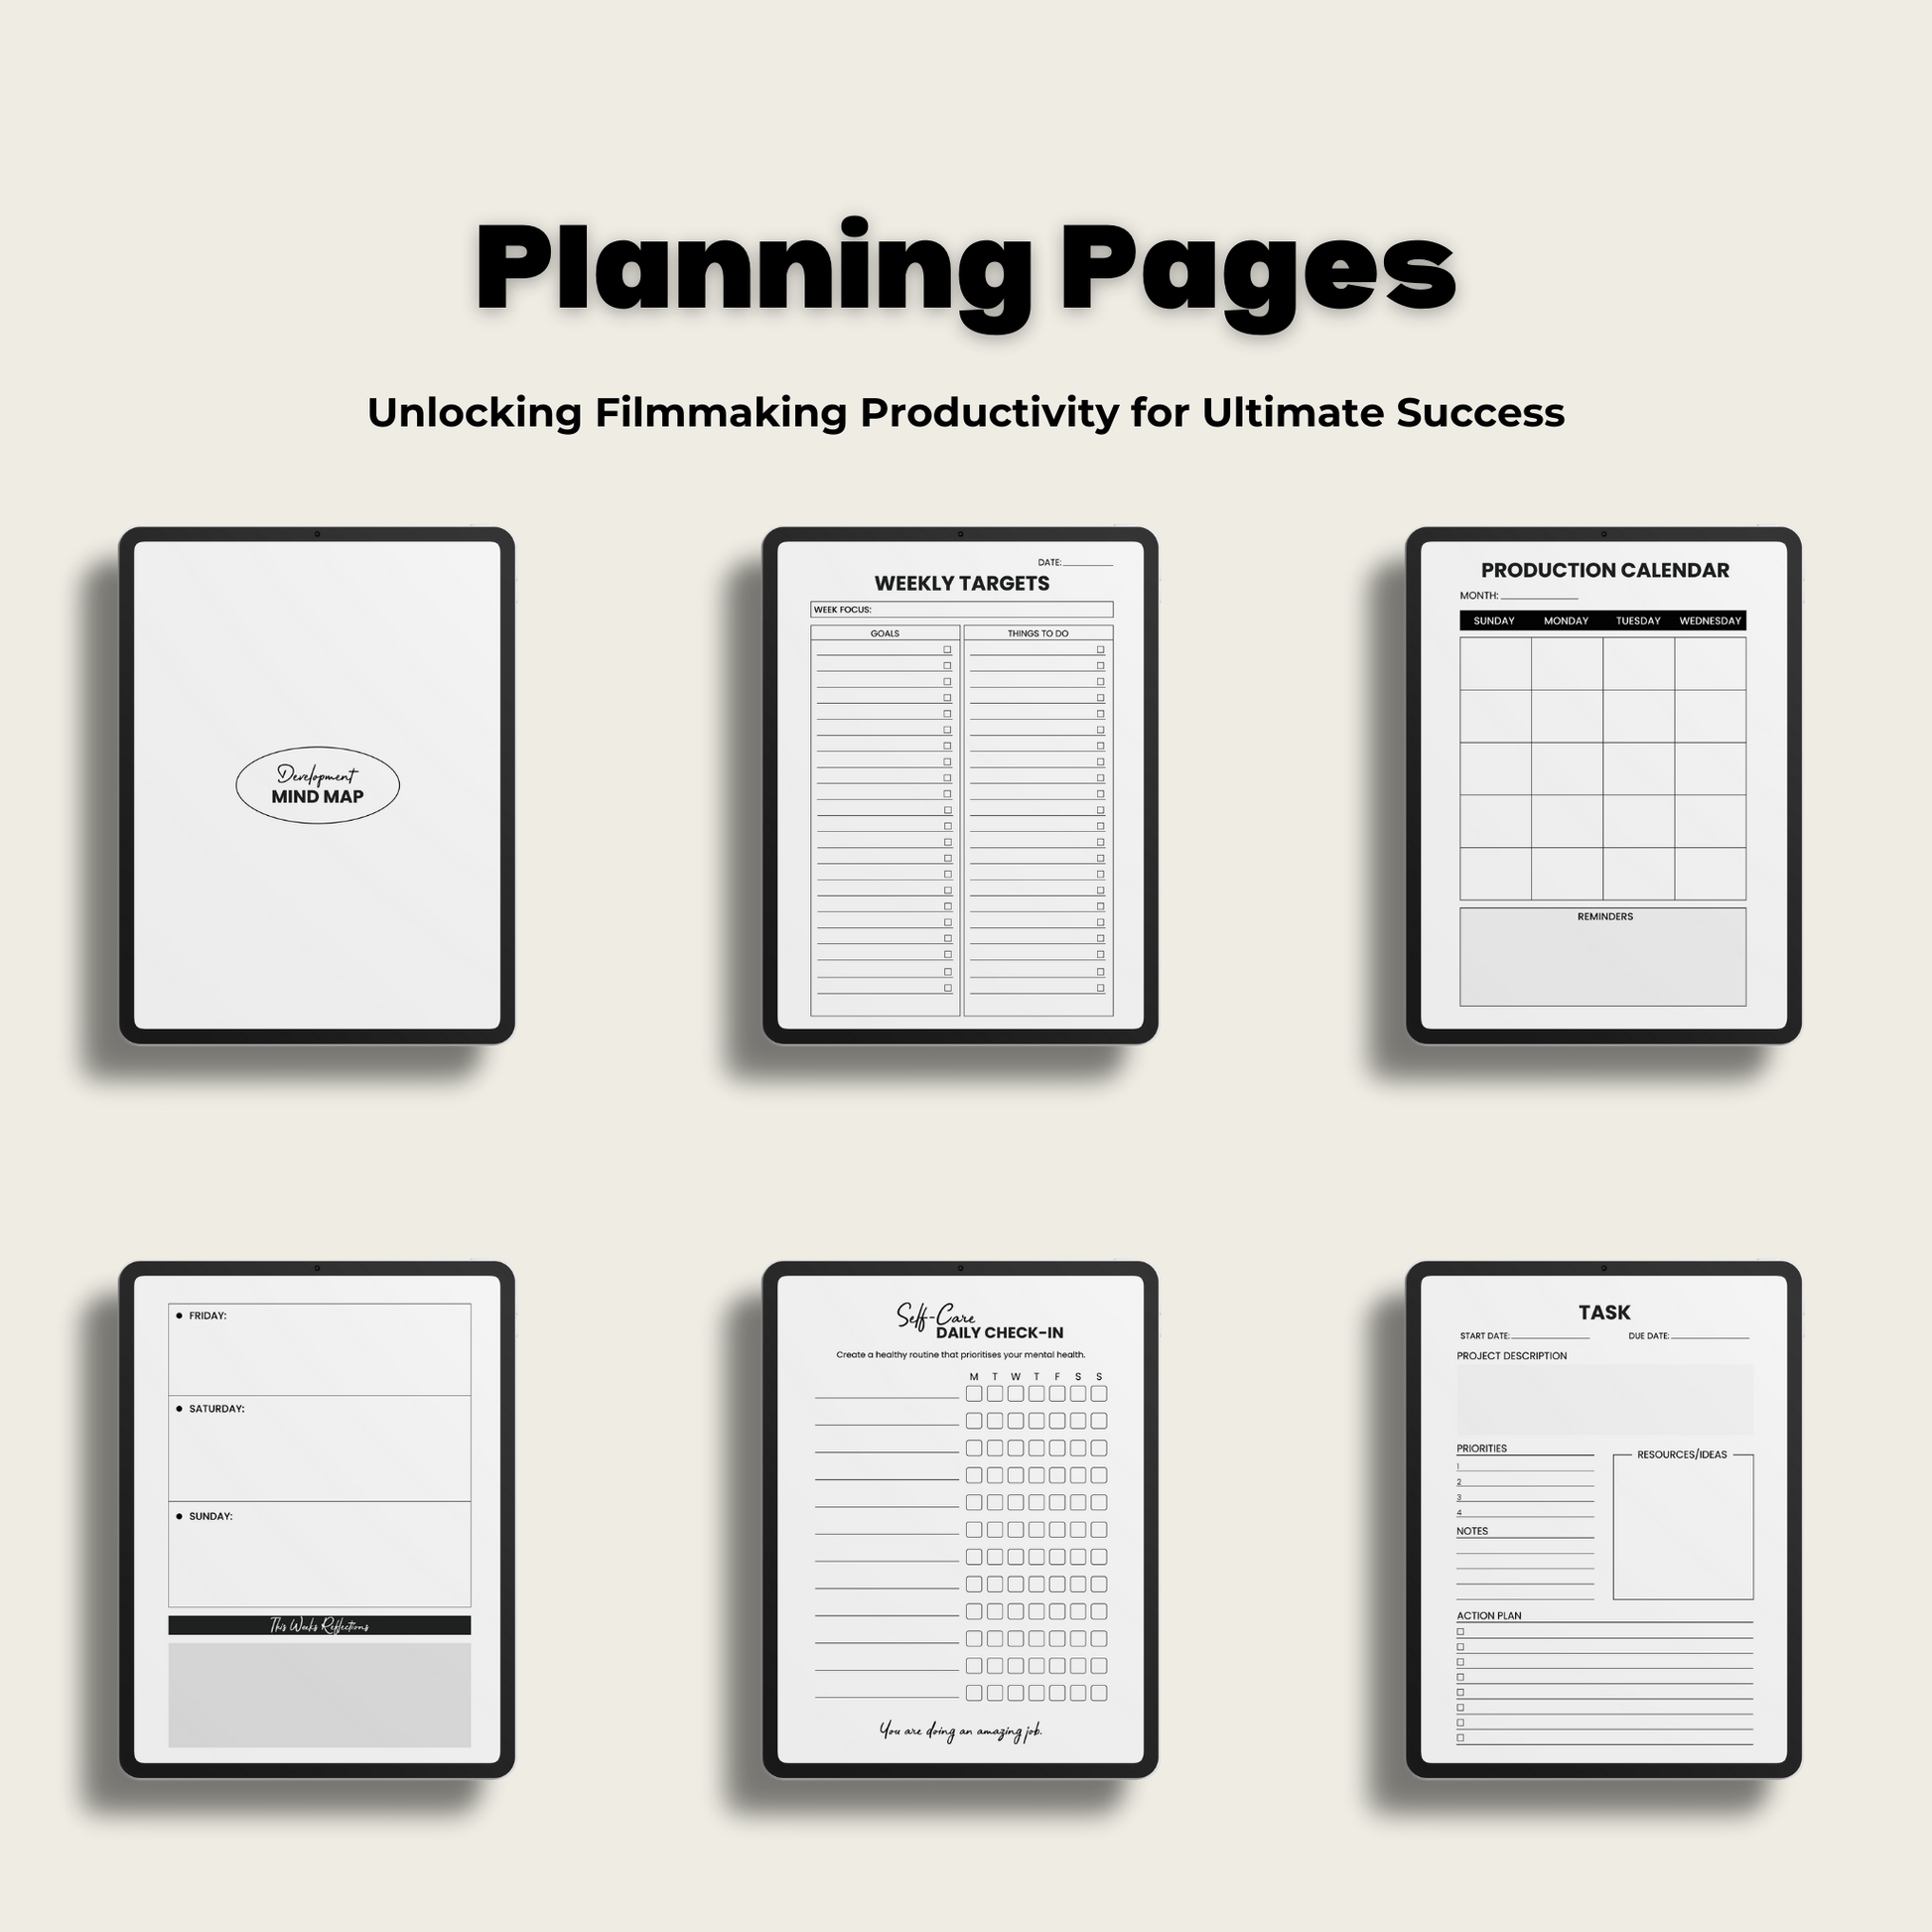 Planning pages inside filmmaking digital planner, mind map, weekly targets, production calendar, journal page, self-care check in and task sheet.